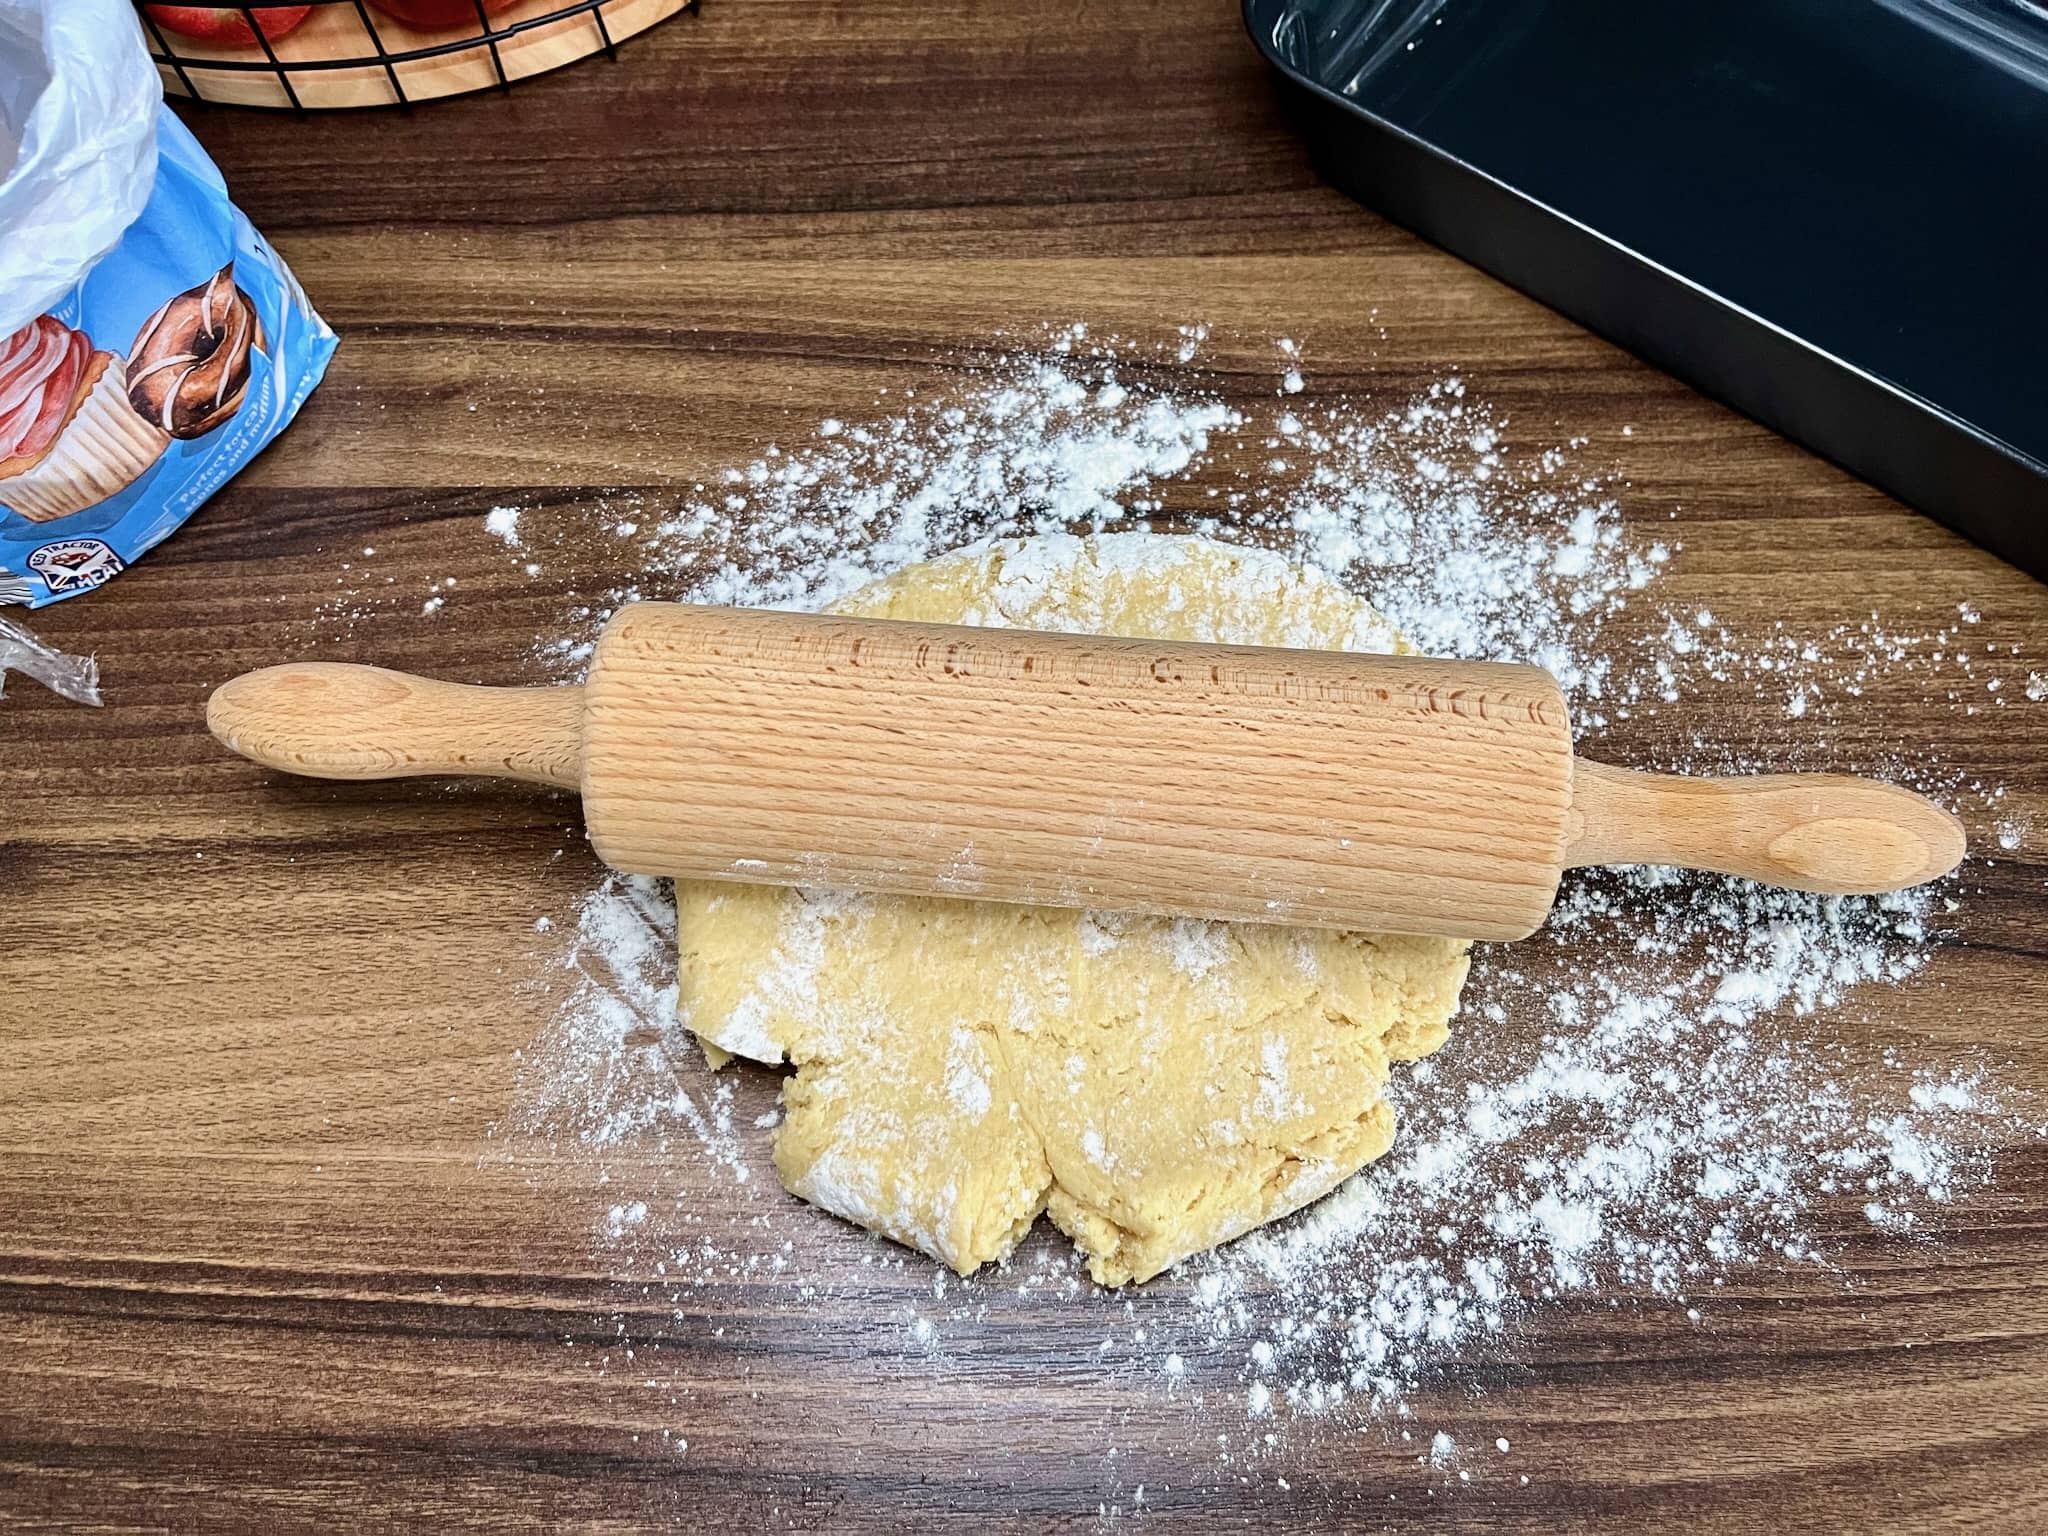 Using a rolling pin, roll out one portion of the dough on a lightly floured surface